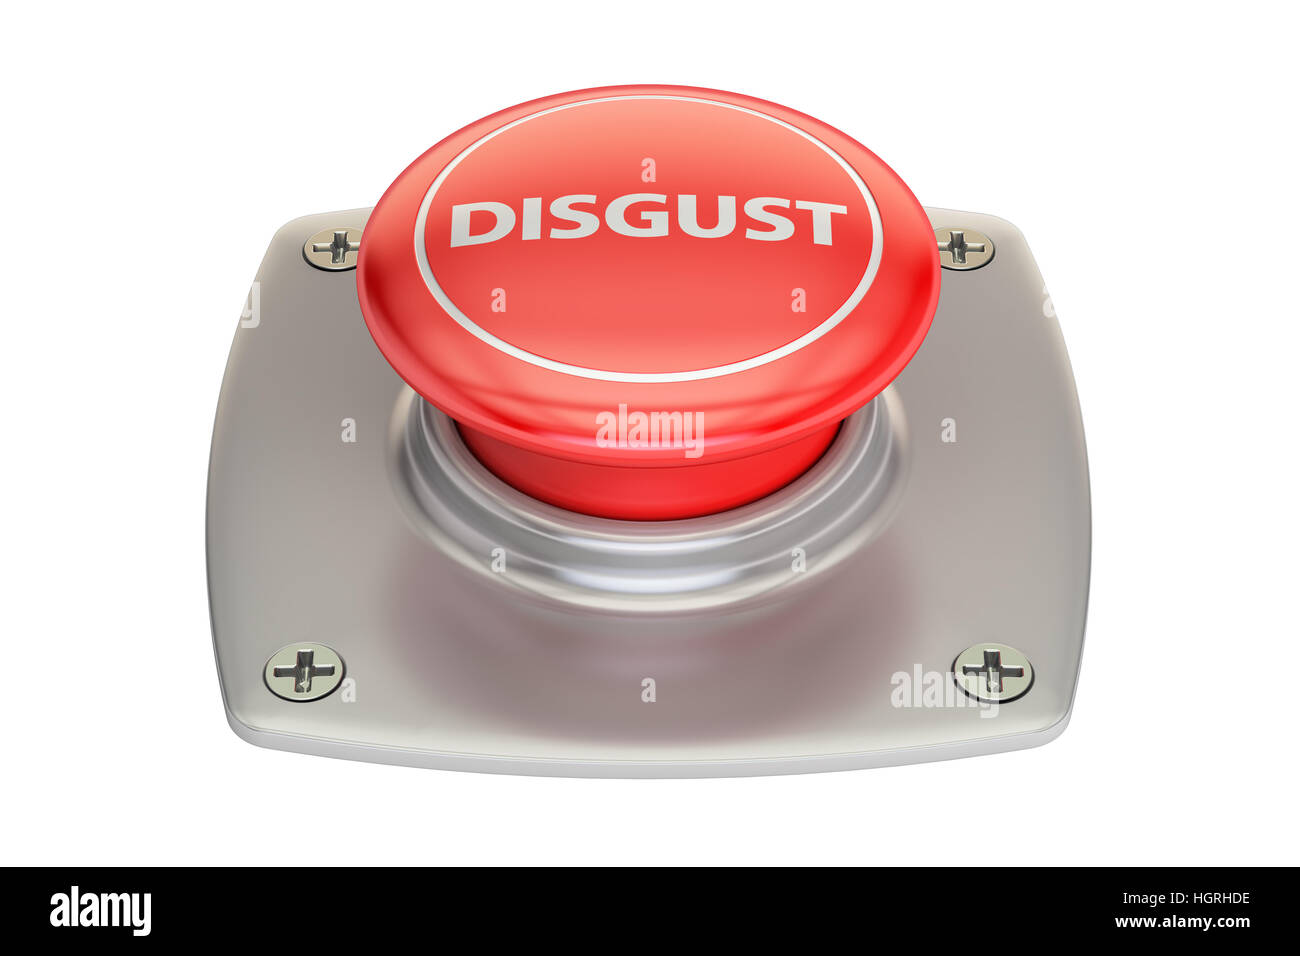 Disgust Red Button, 3D rendering isolated on white background Stock Photo